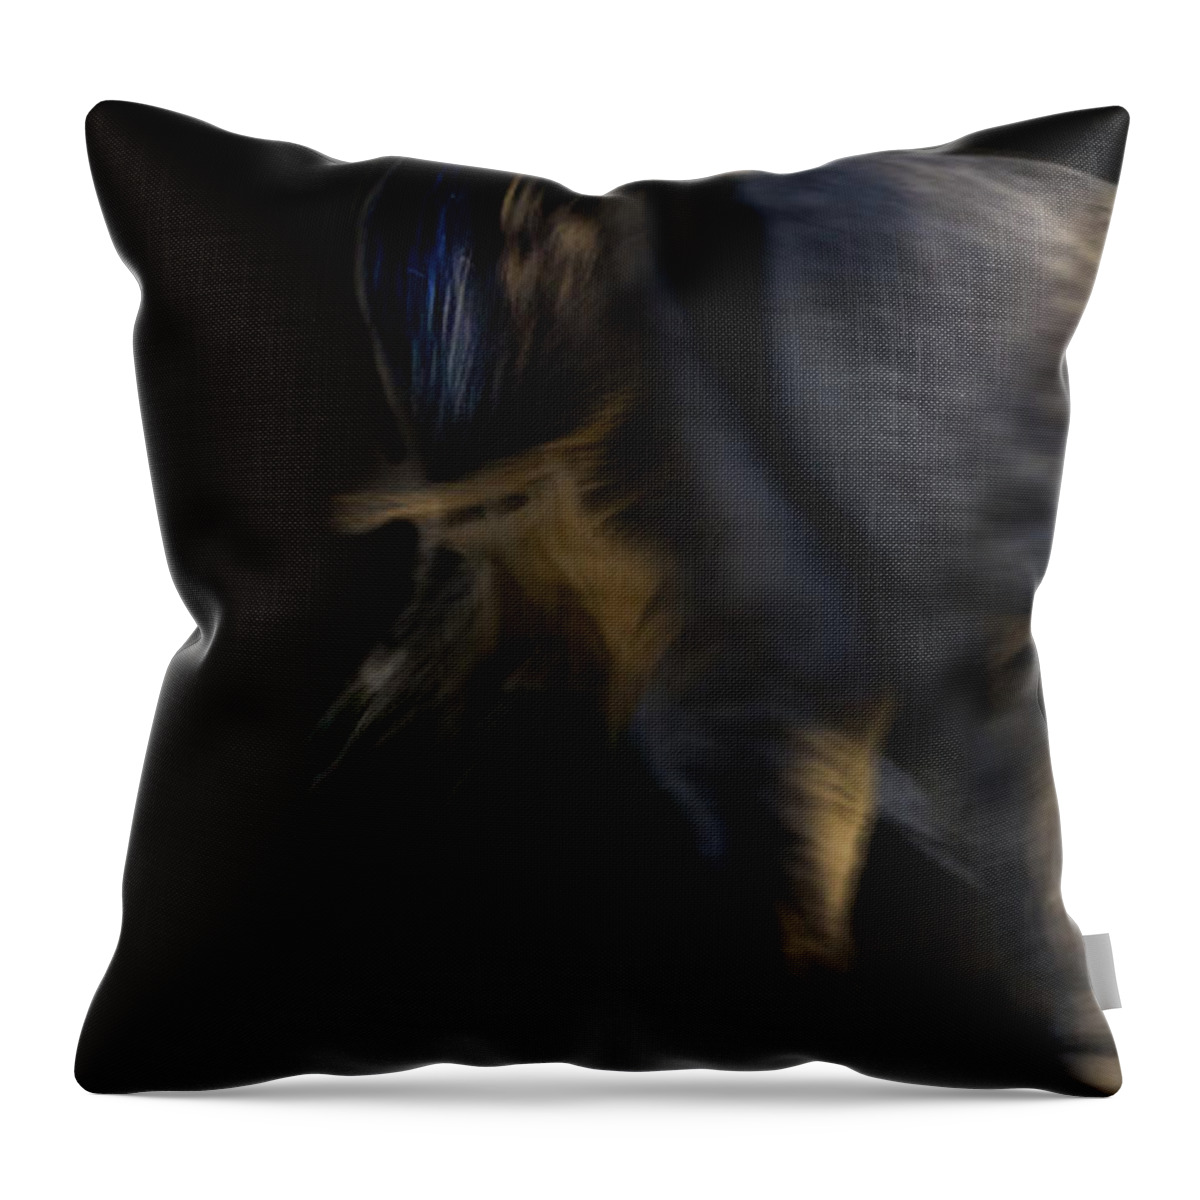 Andalusia Throw Pillow featuring the photograph Americano 12 by Catherine Sobredo